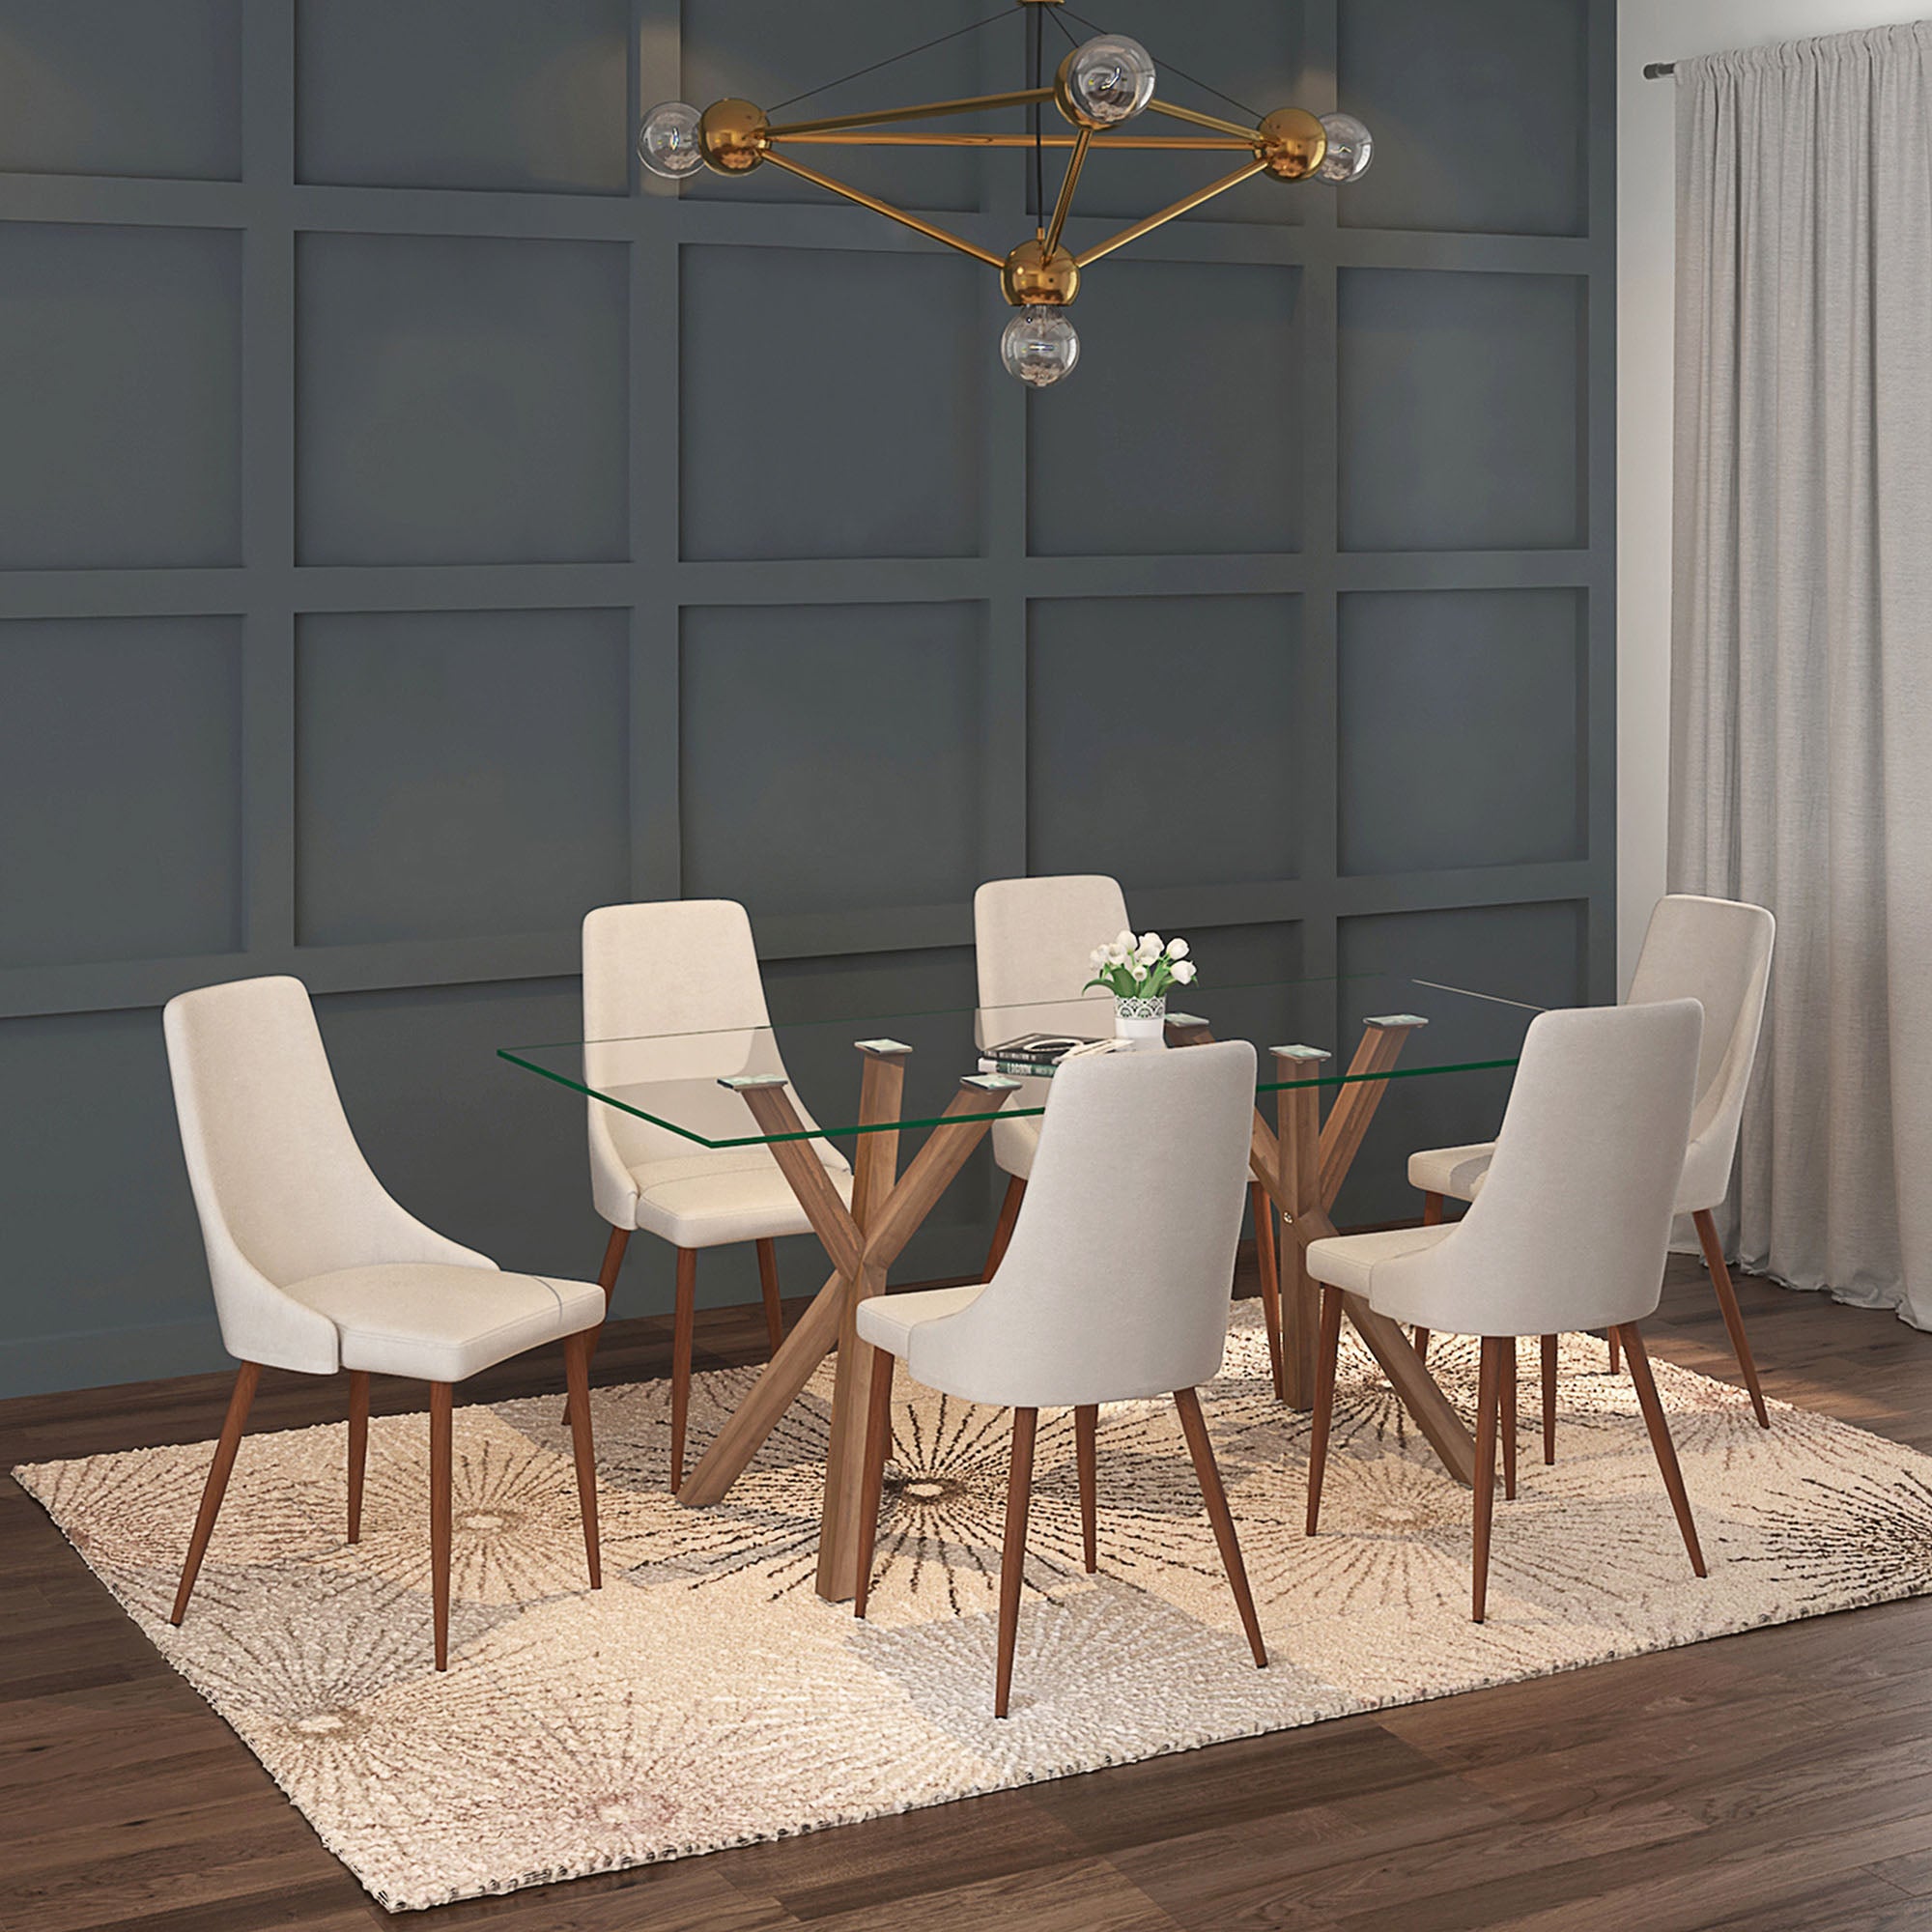 STARK 71" GLASS DINING TABLE WALNUT / CORA BEIGE CHAIRS -7PC DINING SET